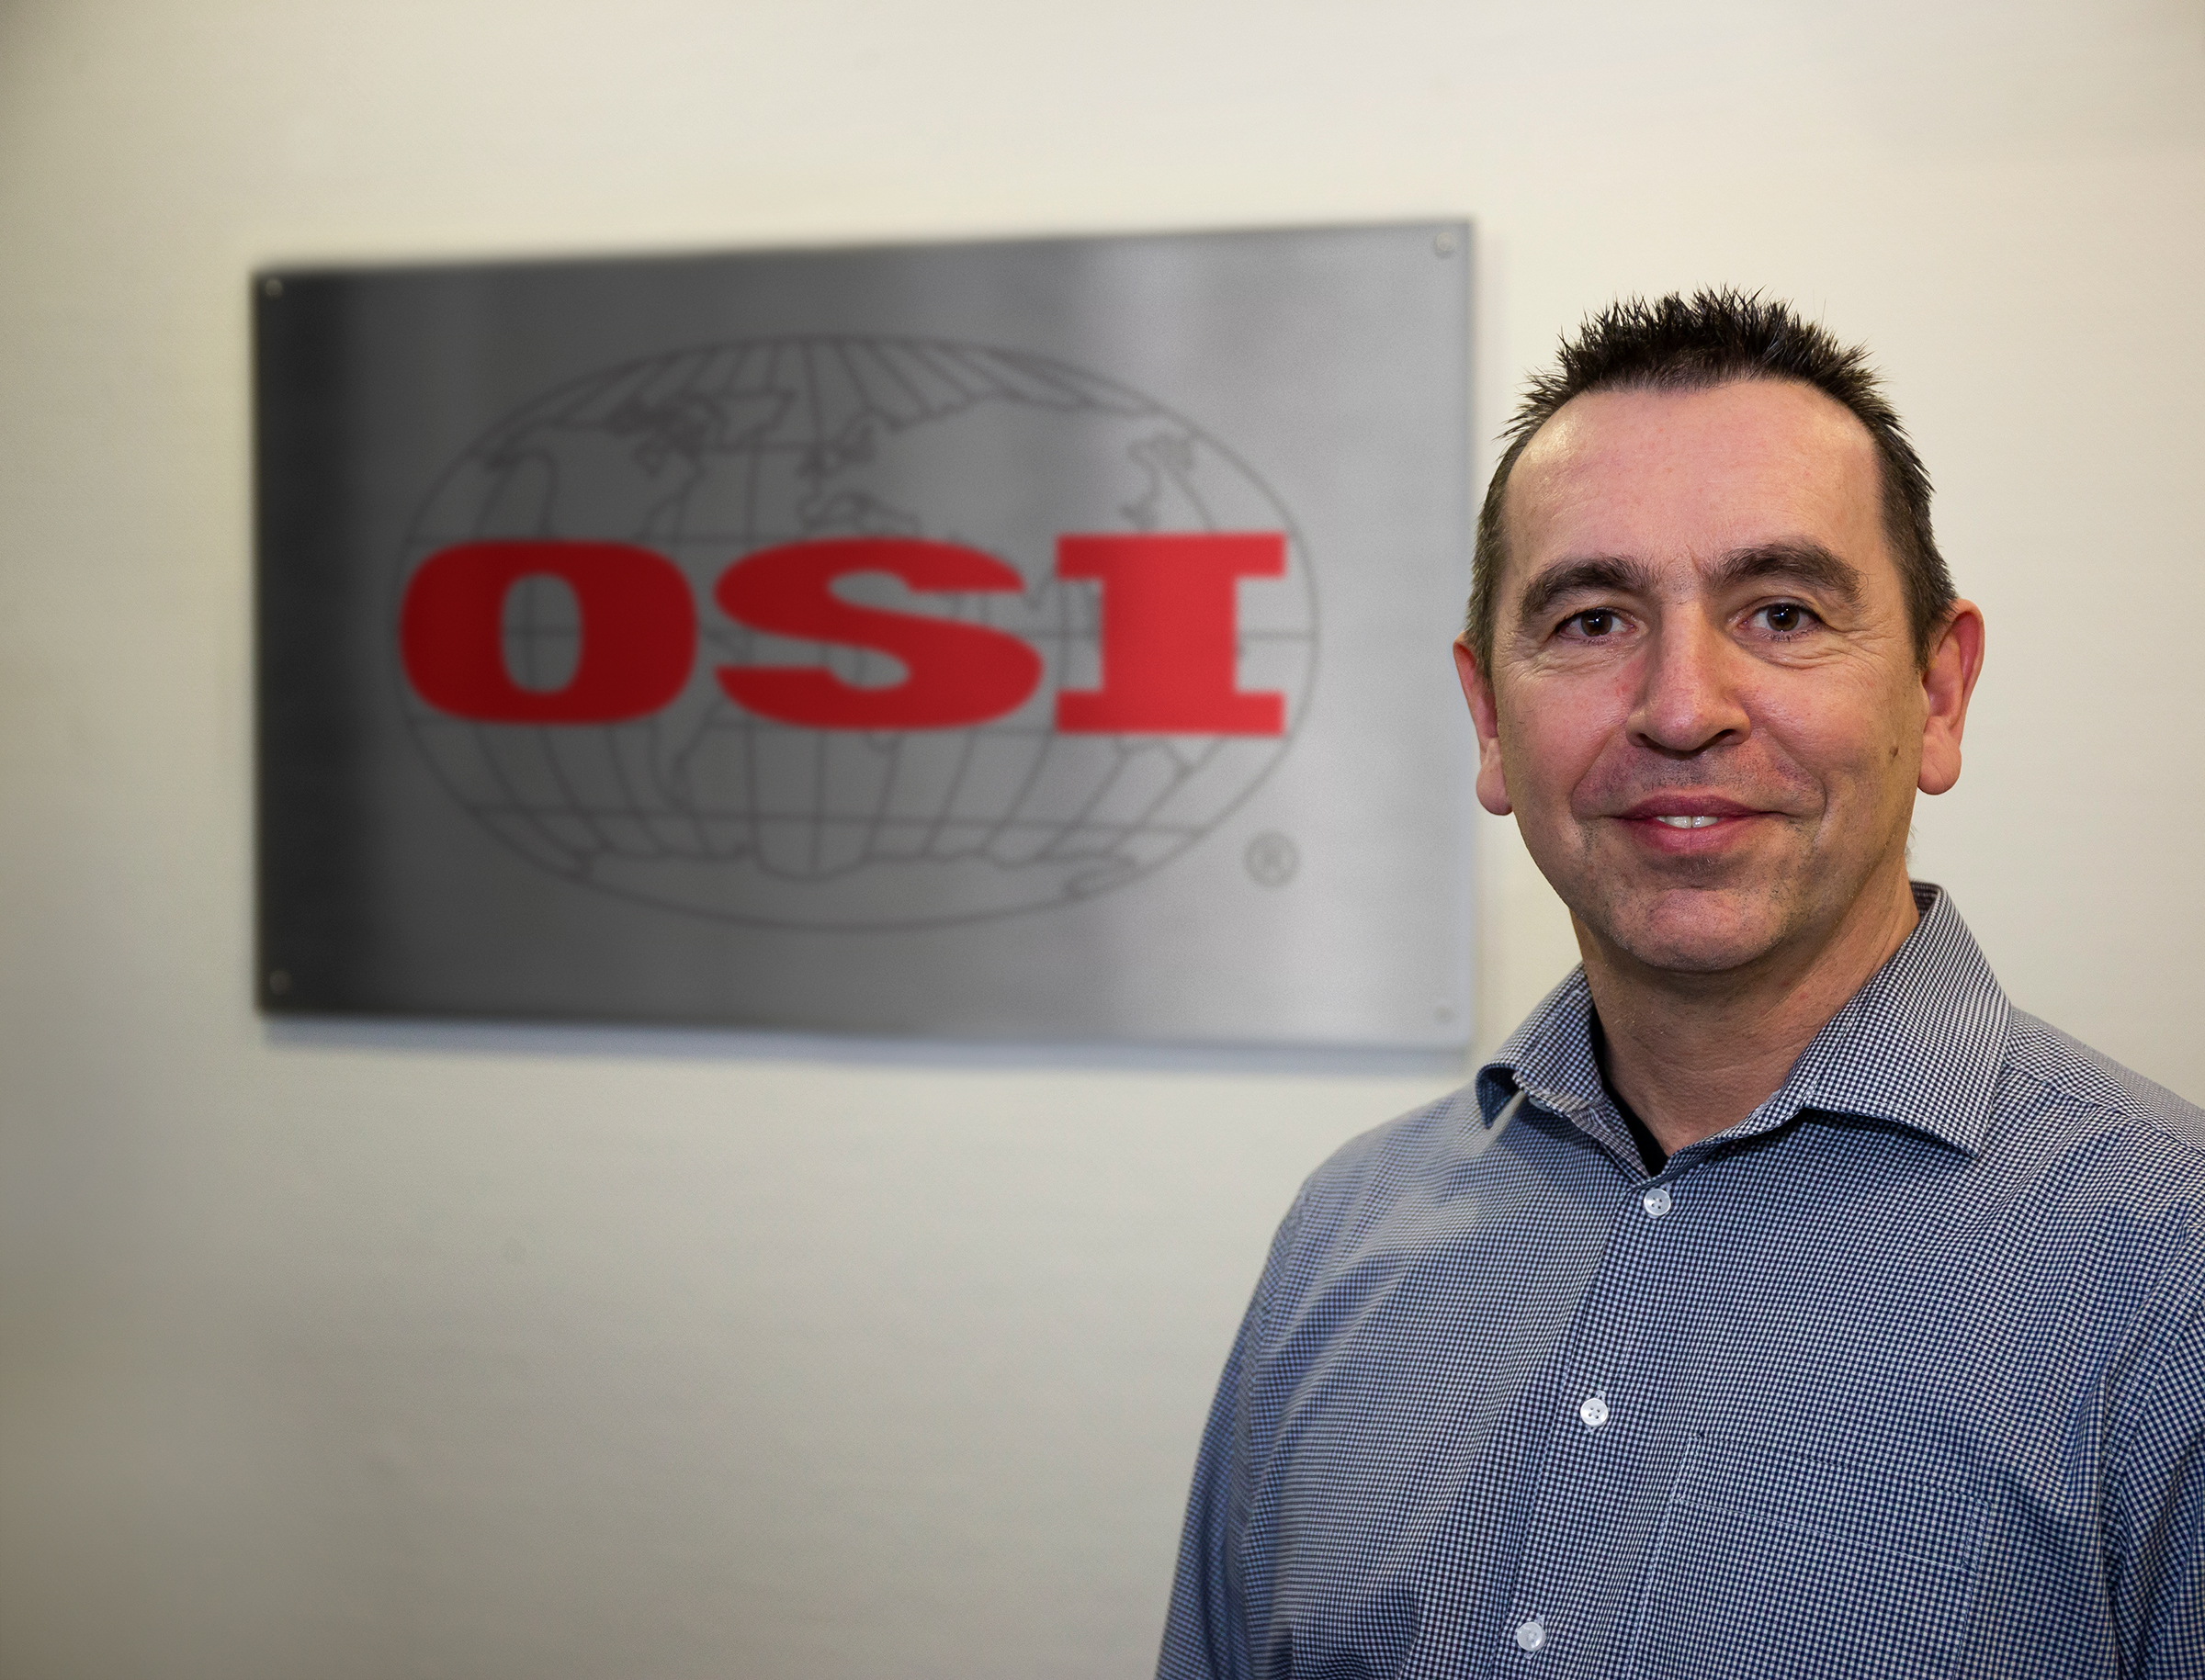 OSI Food Solutions Germany: Increasing capacity and quality